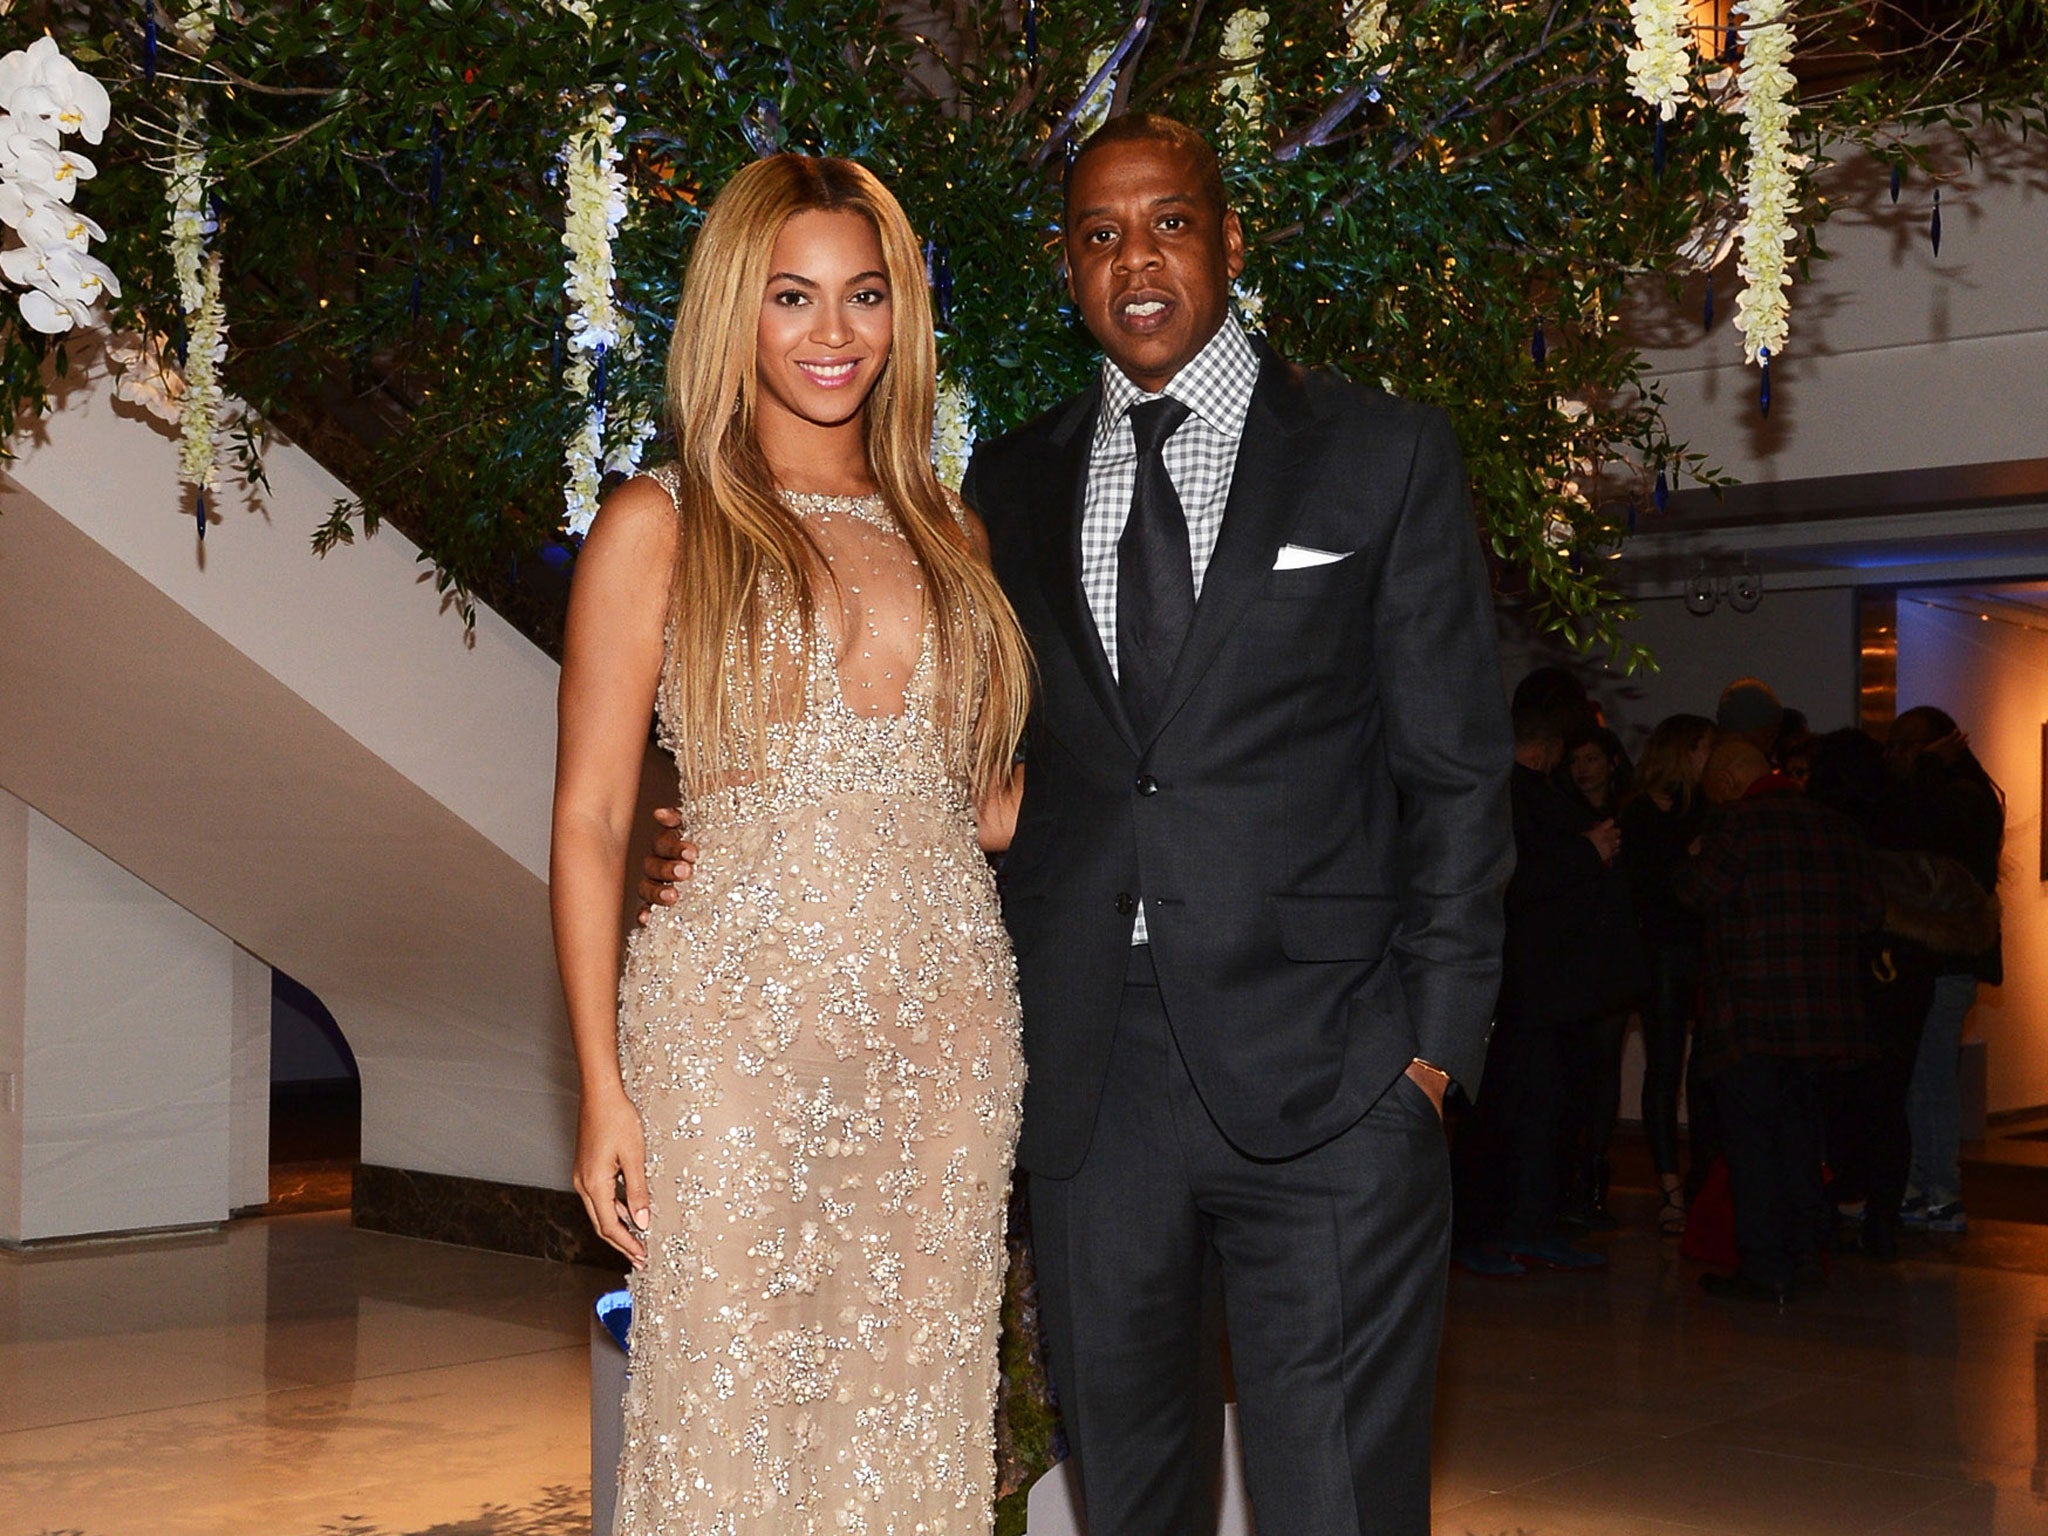 Beyonce and Jay-Z attend the after party following the premiere of the HBO Documentary Film Beyonce: Life Is But A Dream at Christie's on 12 February, 2013, in New York